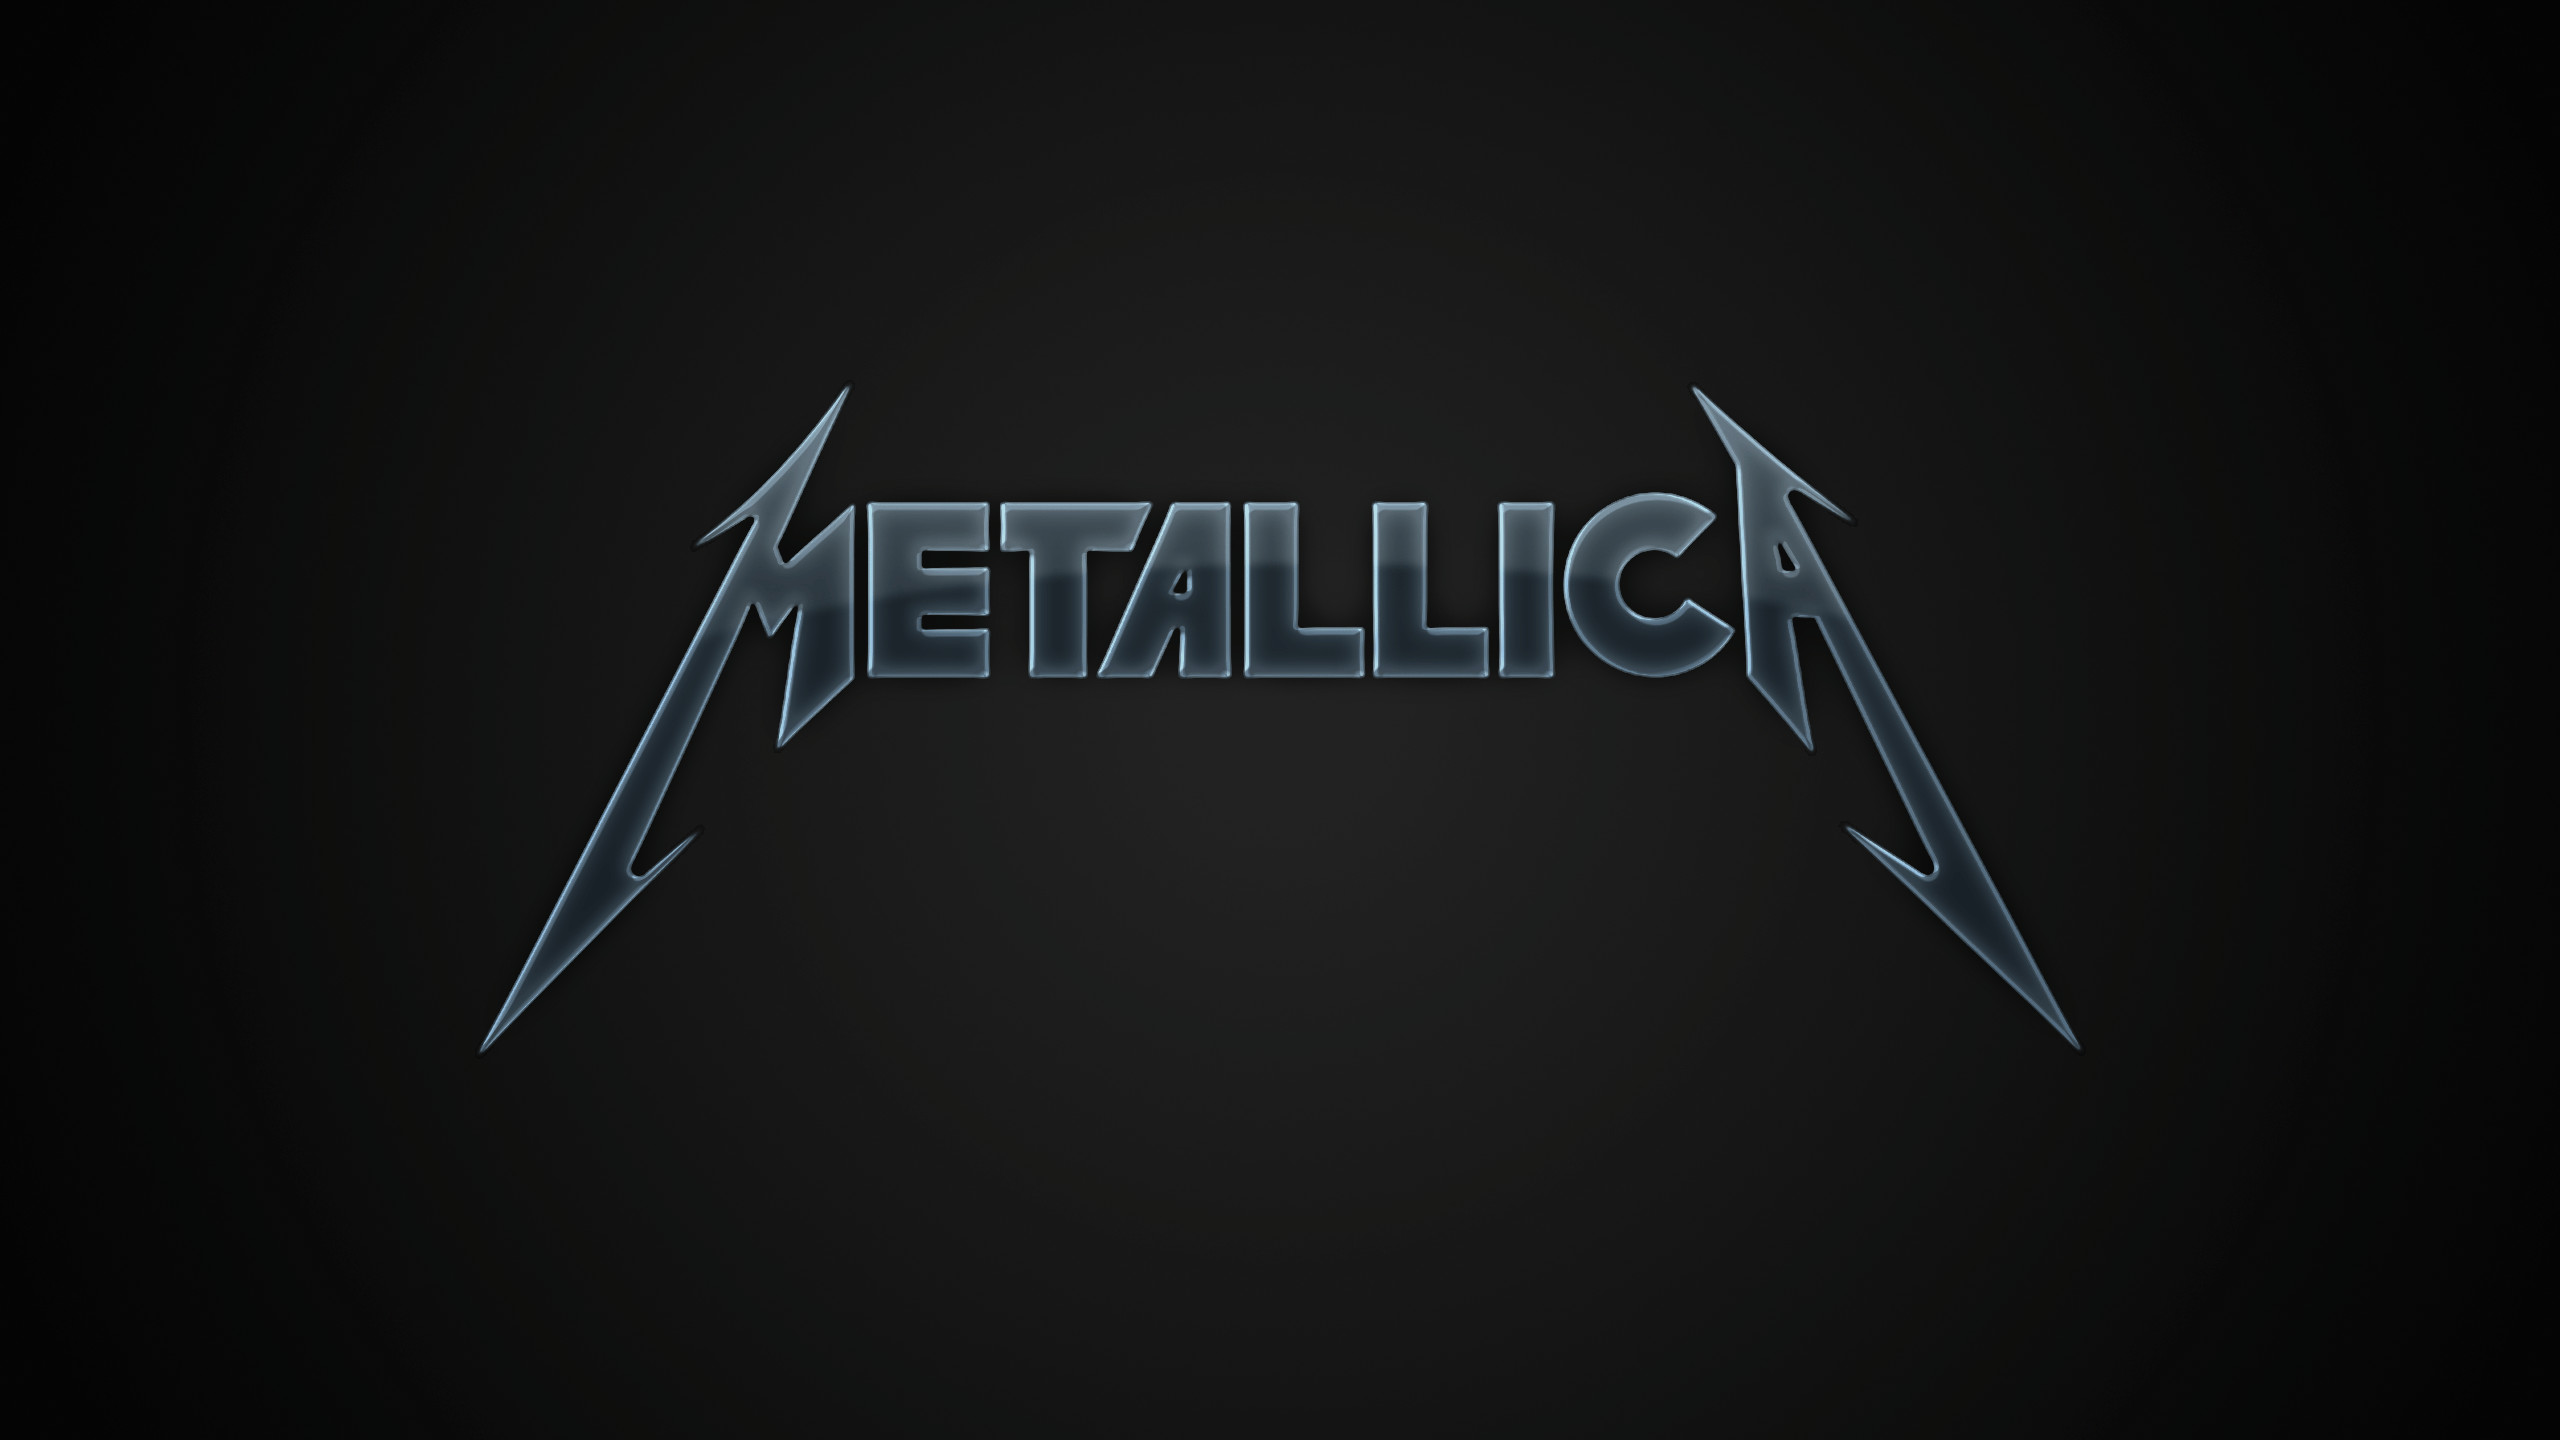 2560x1440 ... Great Metallica Wallpaper of awesome full screen HD wallpapers to  download for free. You can